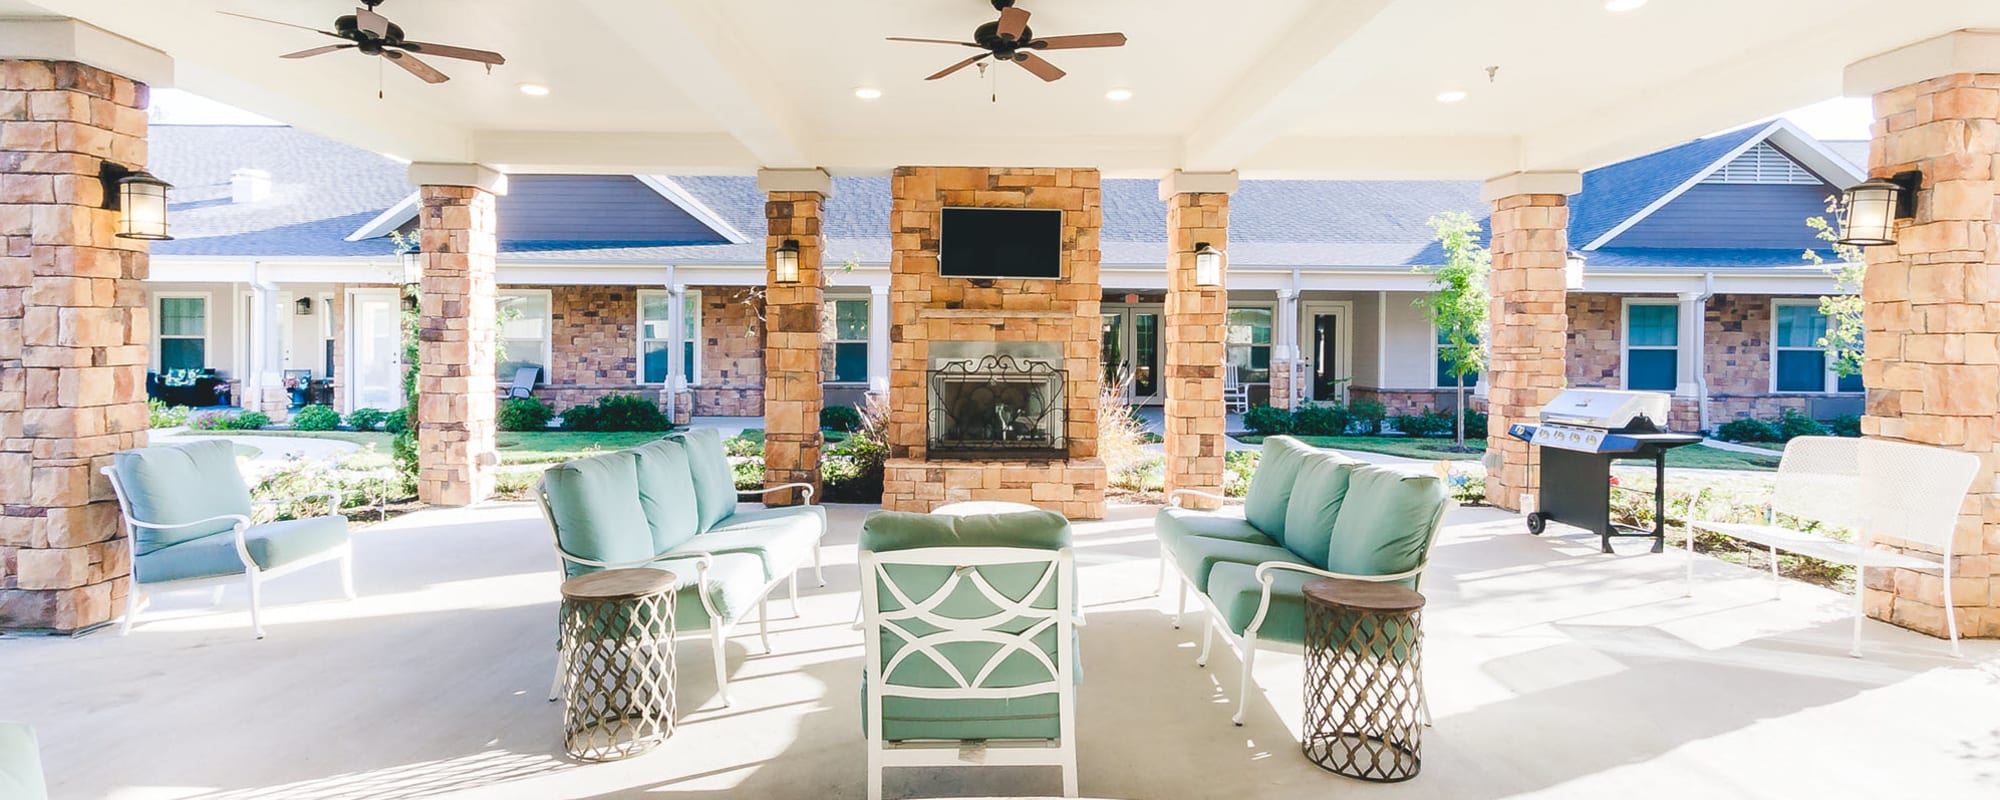 Services & Amenities at Wood Glen Court in Spring, Texas